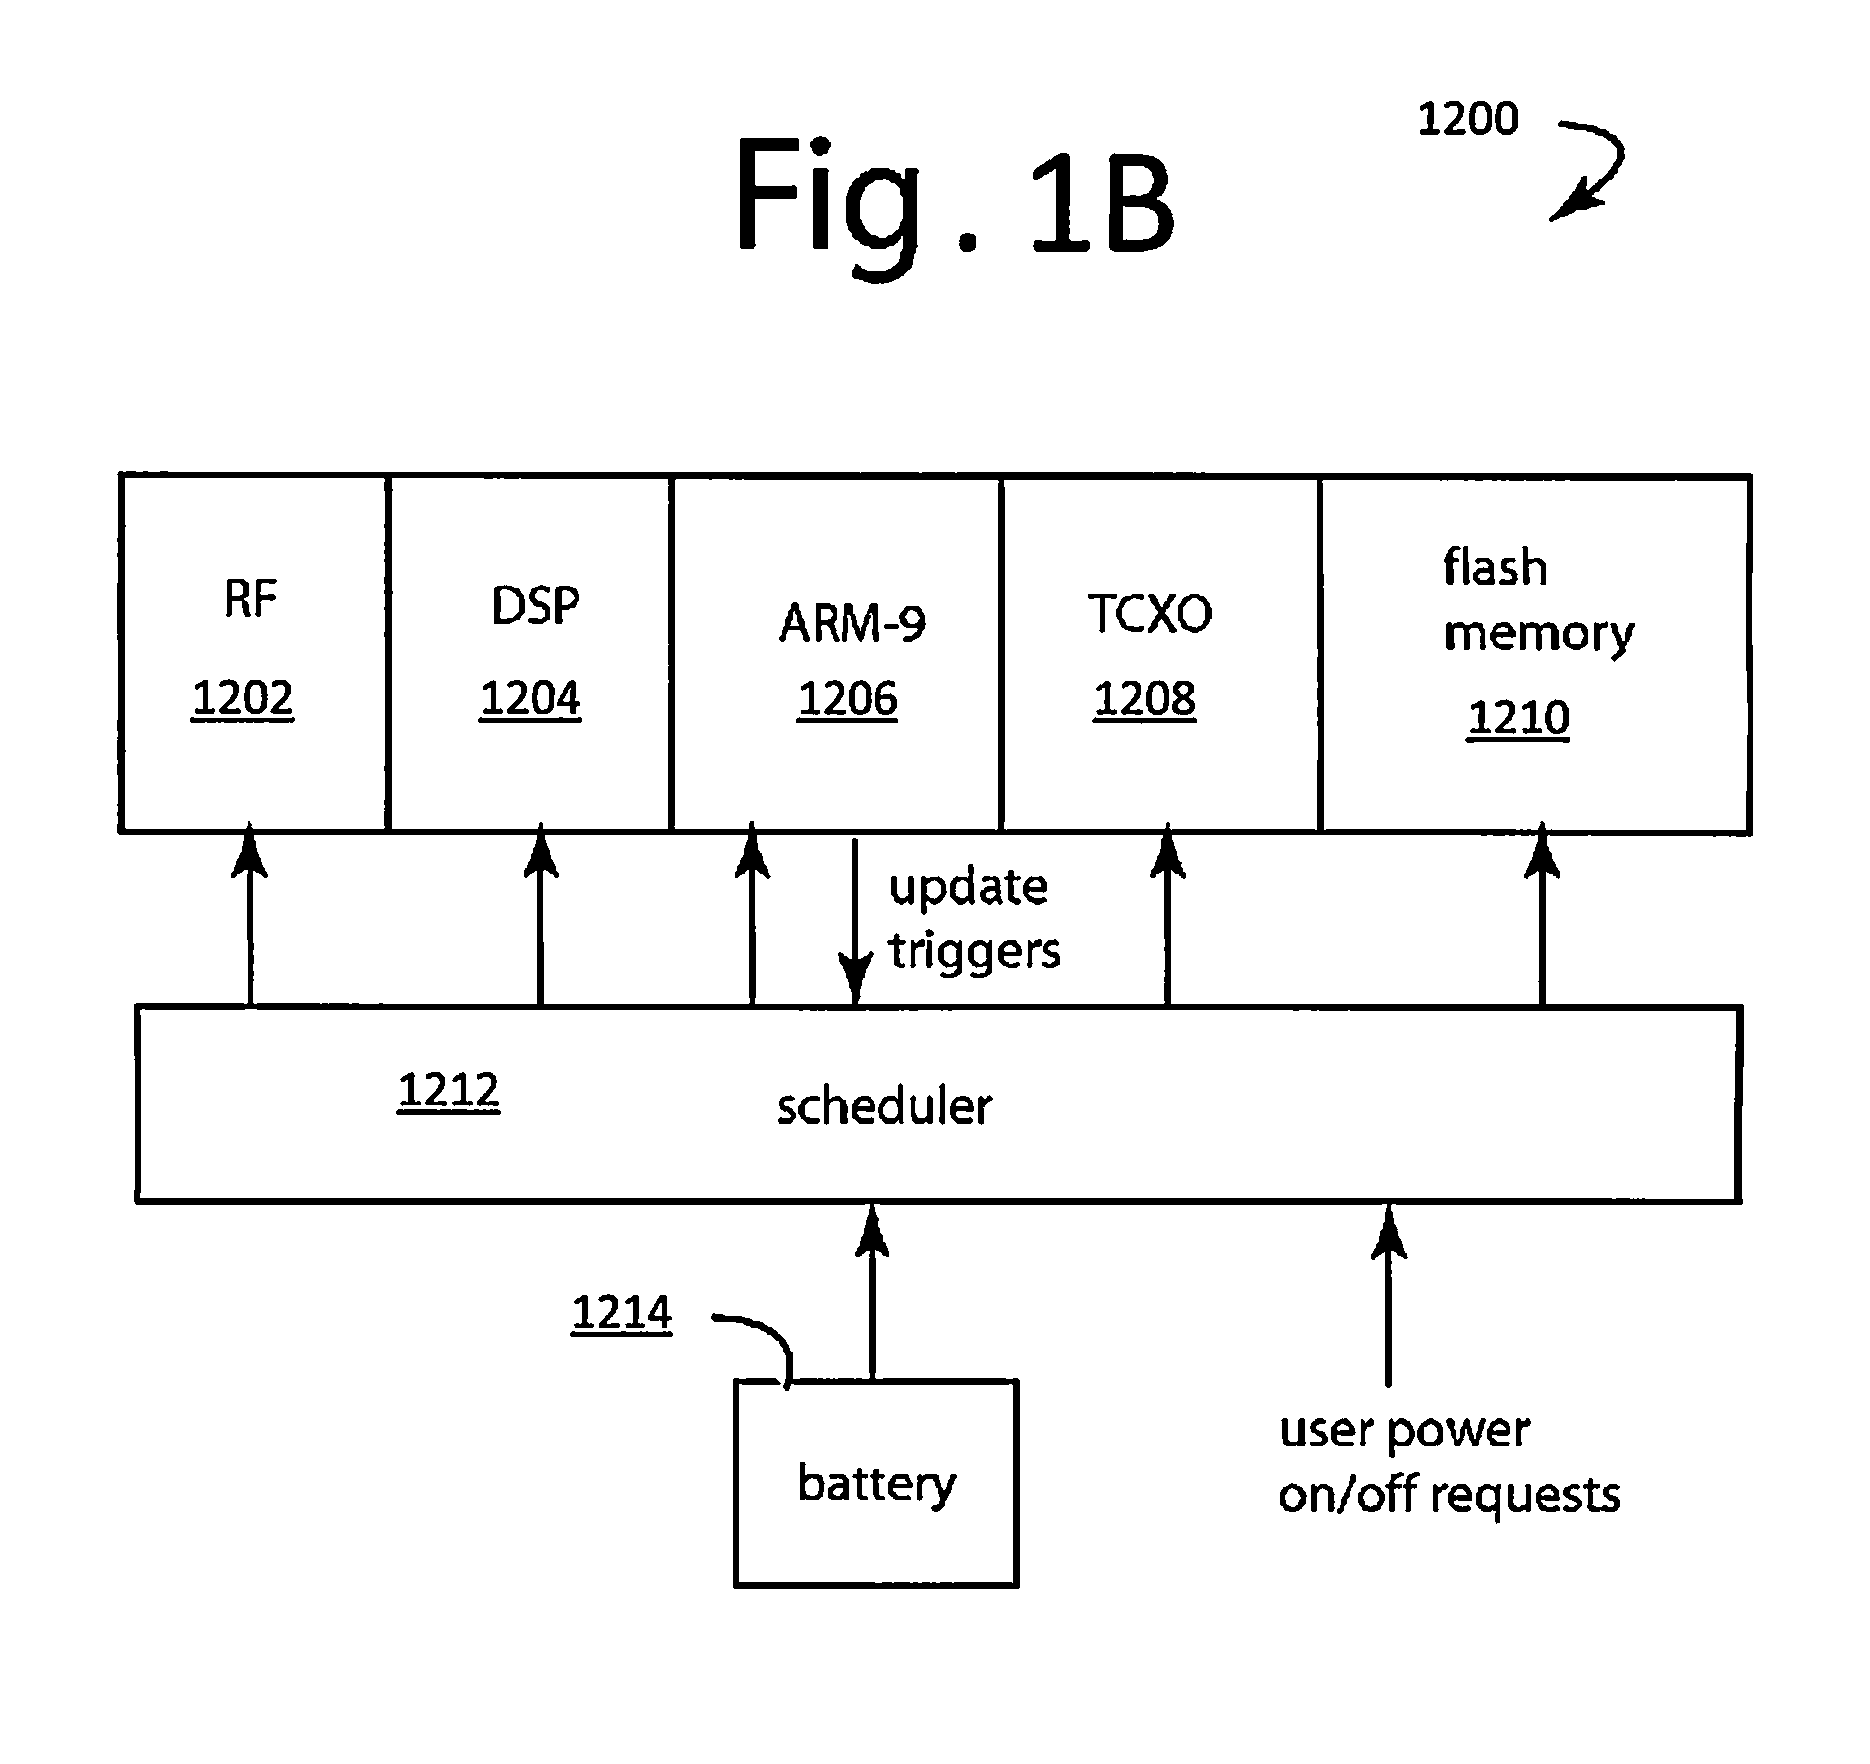 Location determination in multi-system gnns environment using conversion of data into a unified format